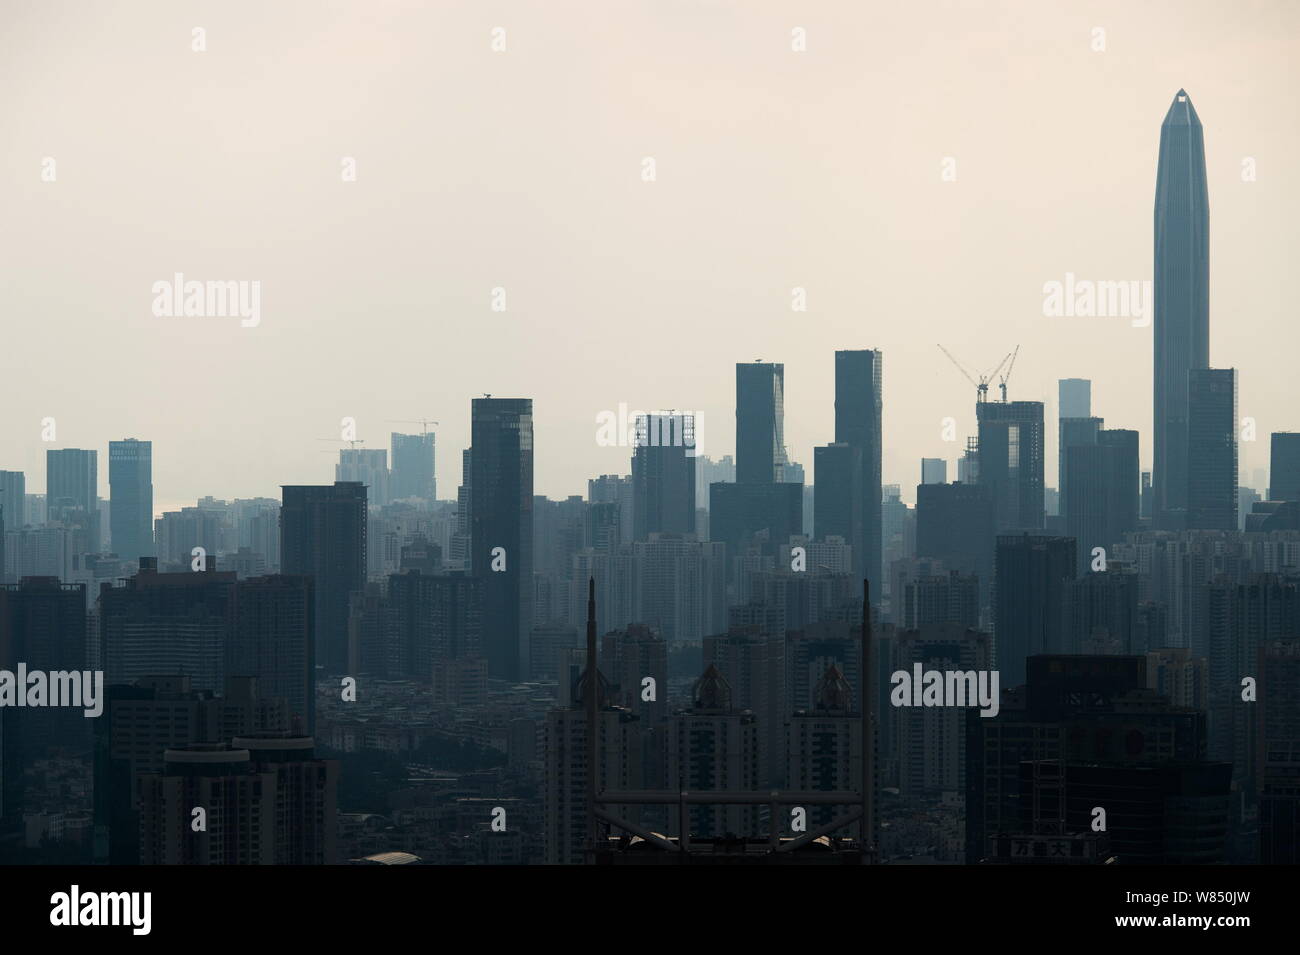 Skyline of Futian District with the Ping An International Finance Centre, tallest, and other high-rise residential and office buildings in Shenzhen ci Stock Photo